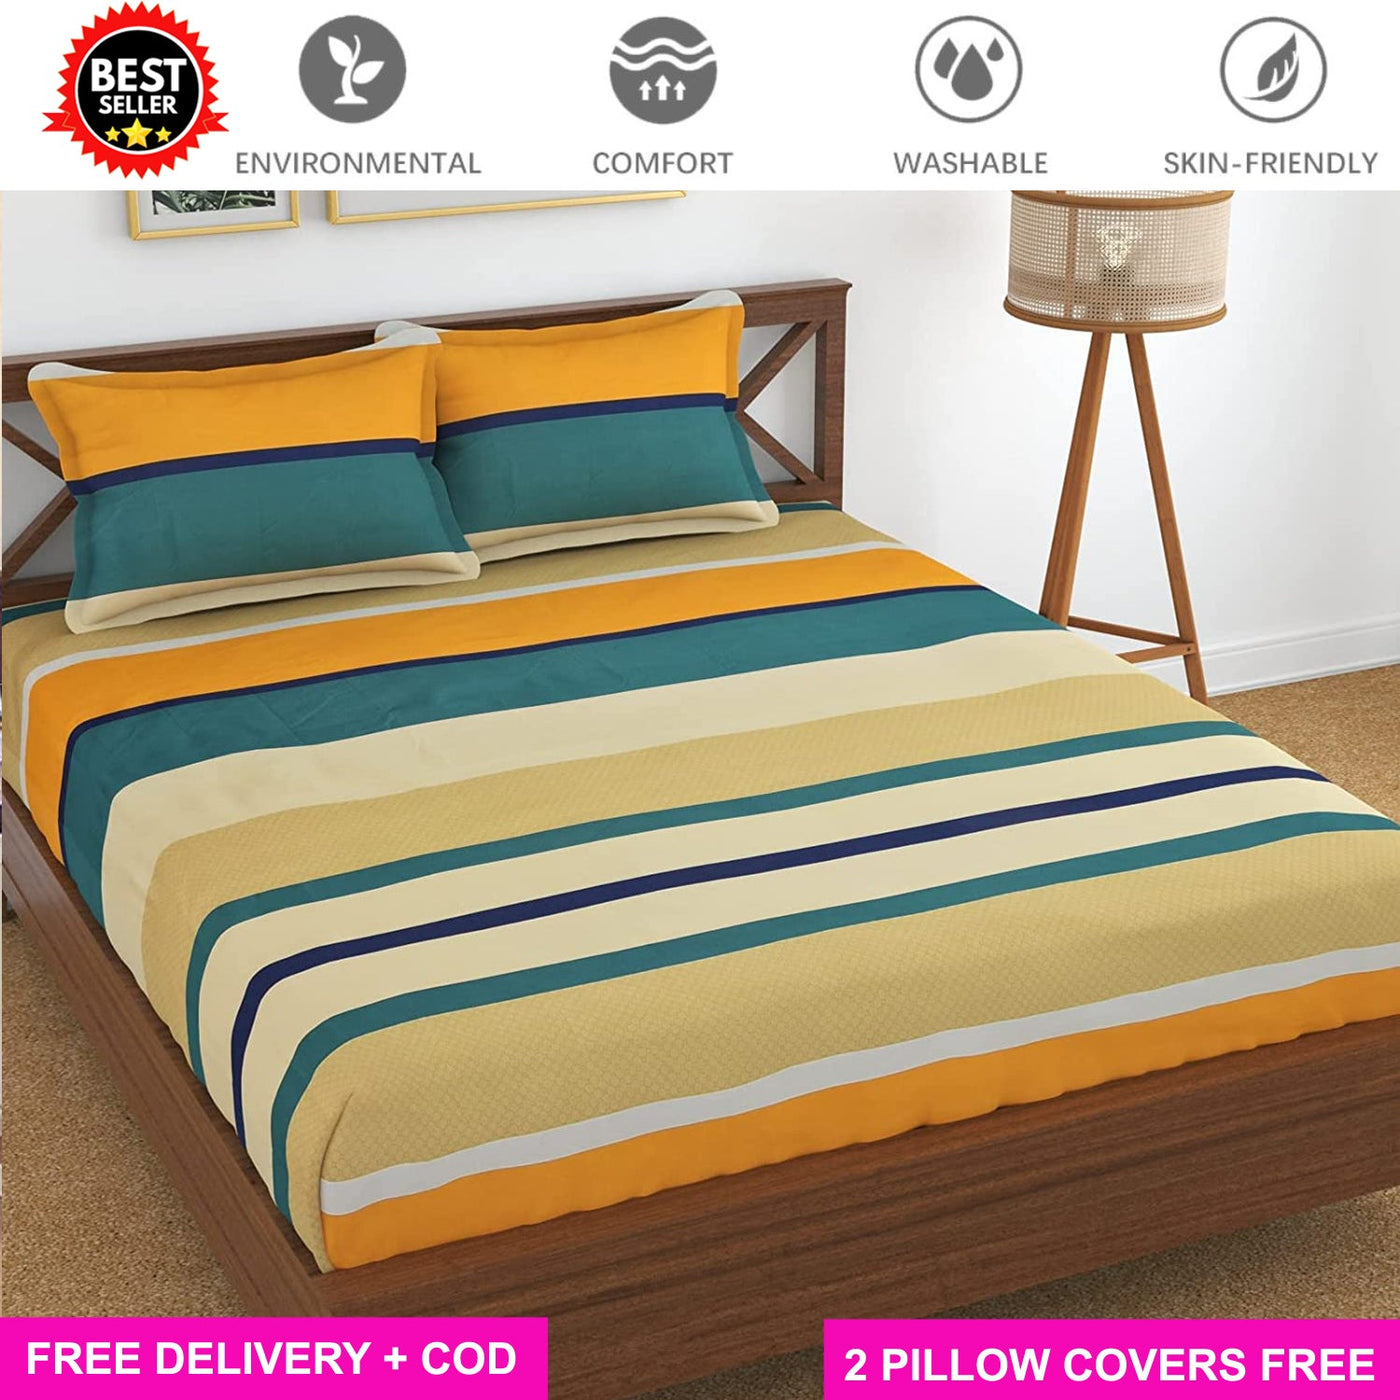 Cotton Elastic Fitted Bedsheet with 2 Pillow Covers - Fits with any Beds & Mattresses Great Happy IN Light Brown KING SIZE 